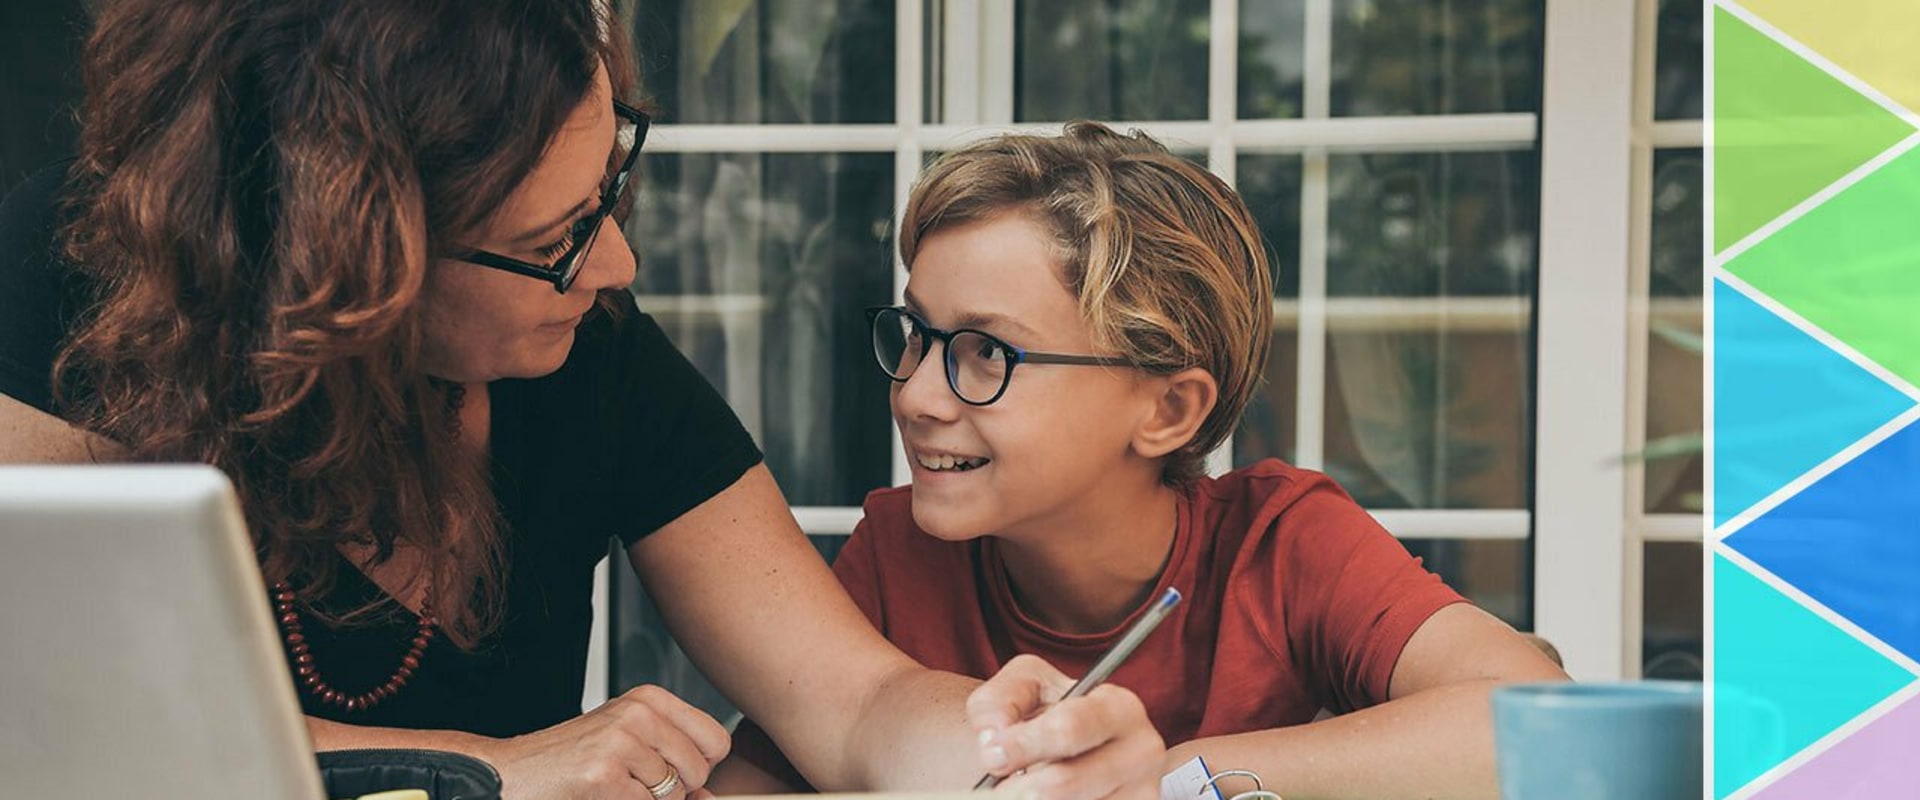 Everything You Need to Know About Homeschooling